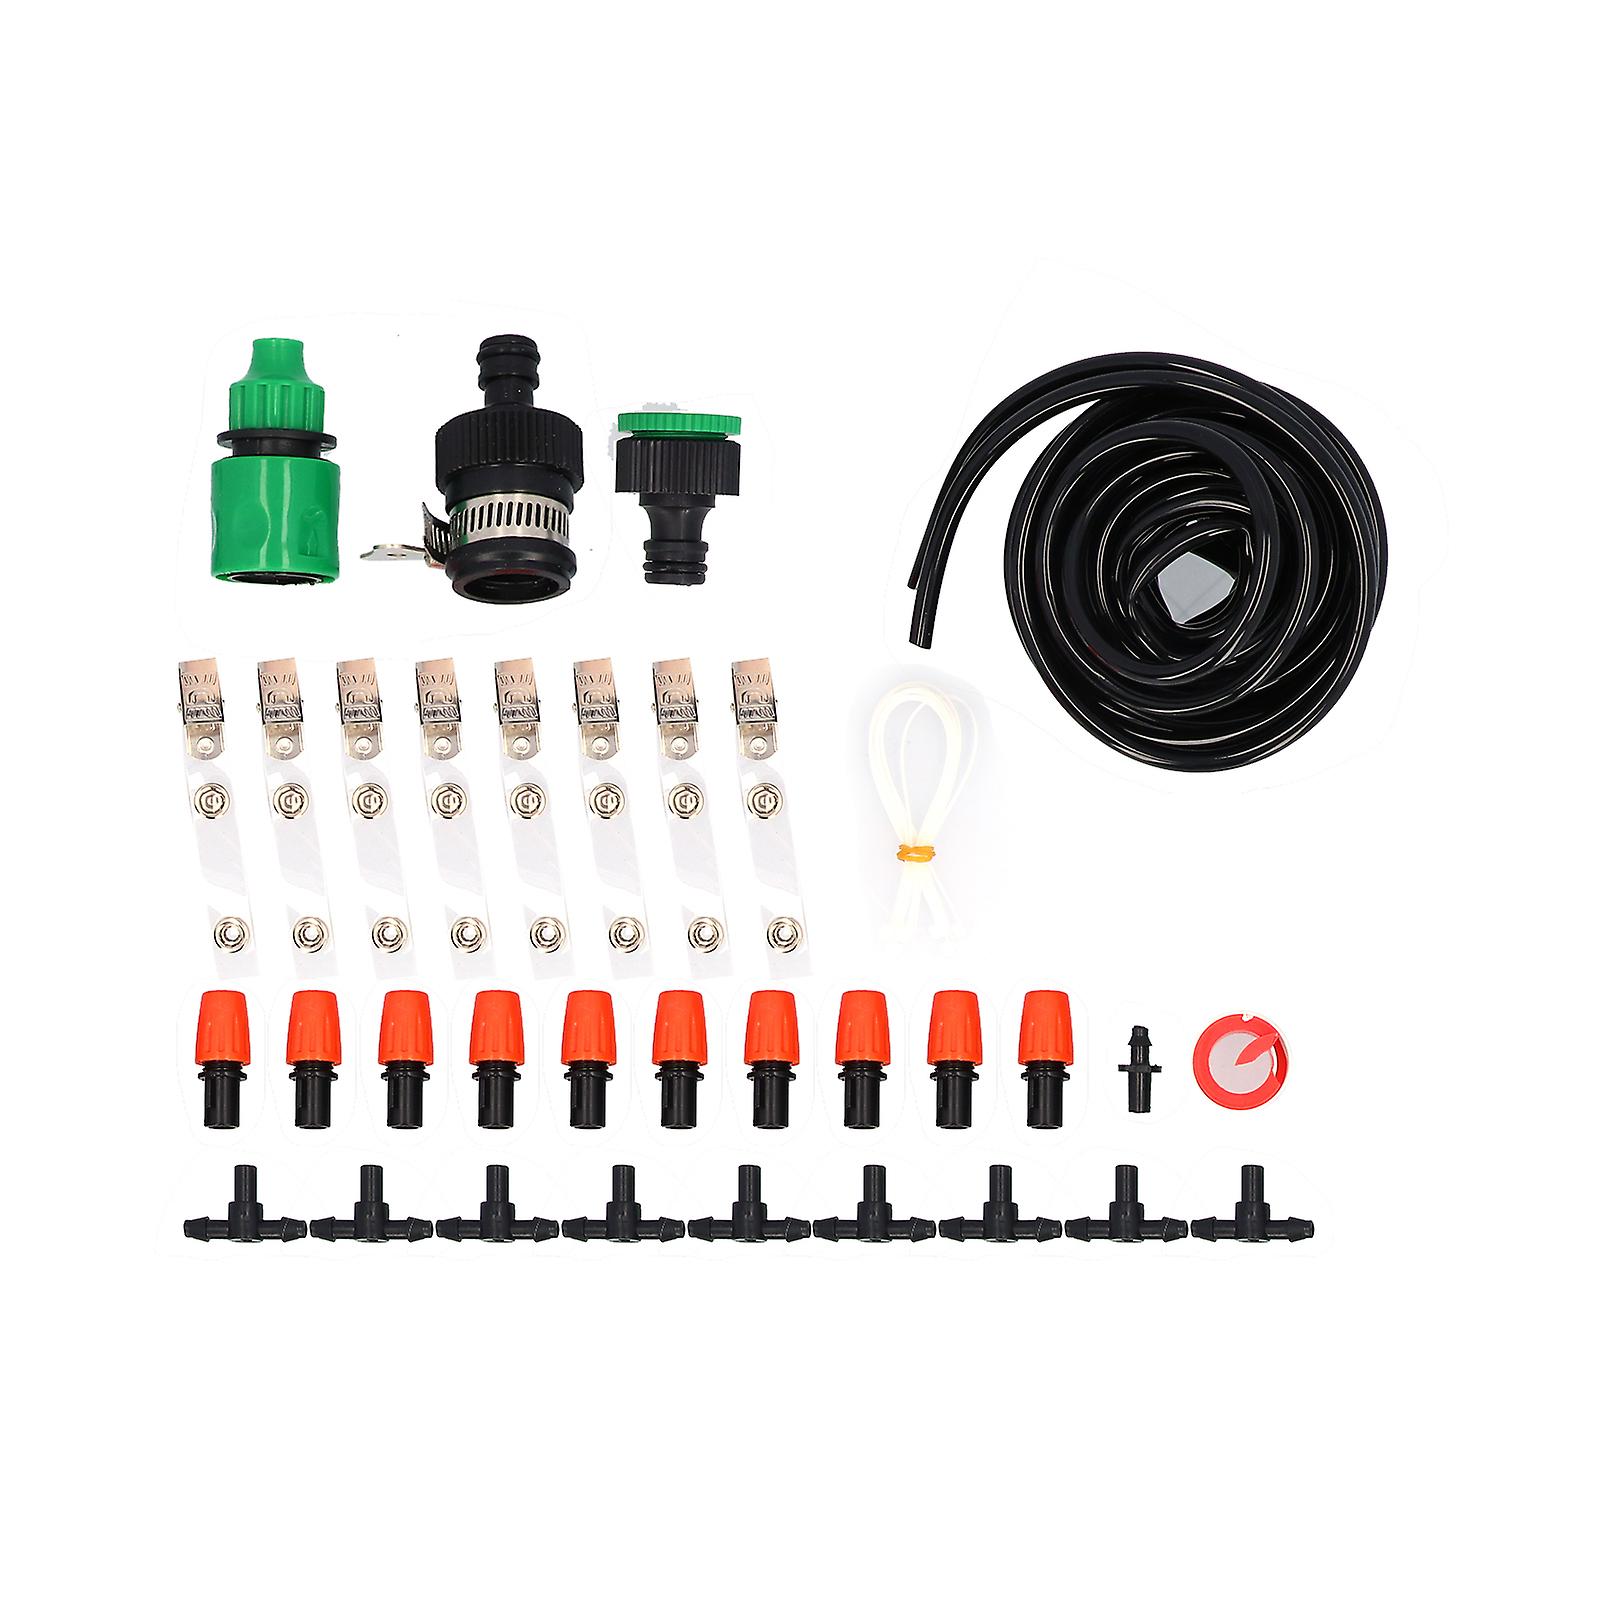 8m Garden Irrigation System Single Outlet Atomizing Kit For Greenhouse Flower Bed